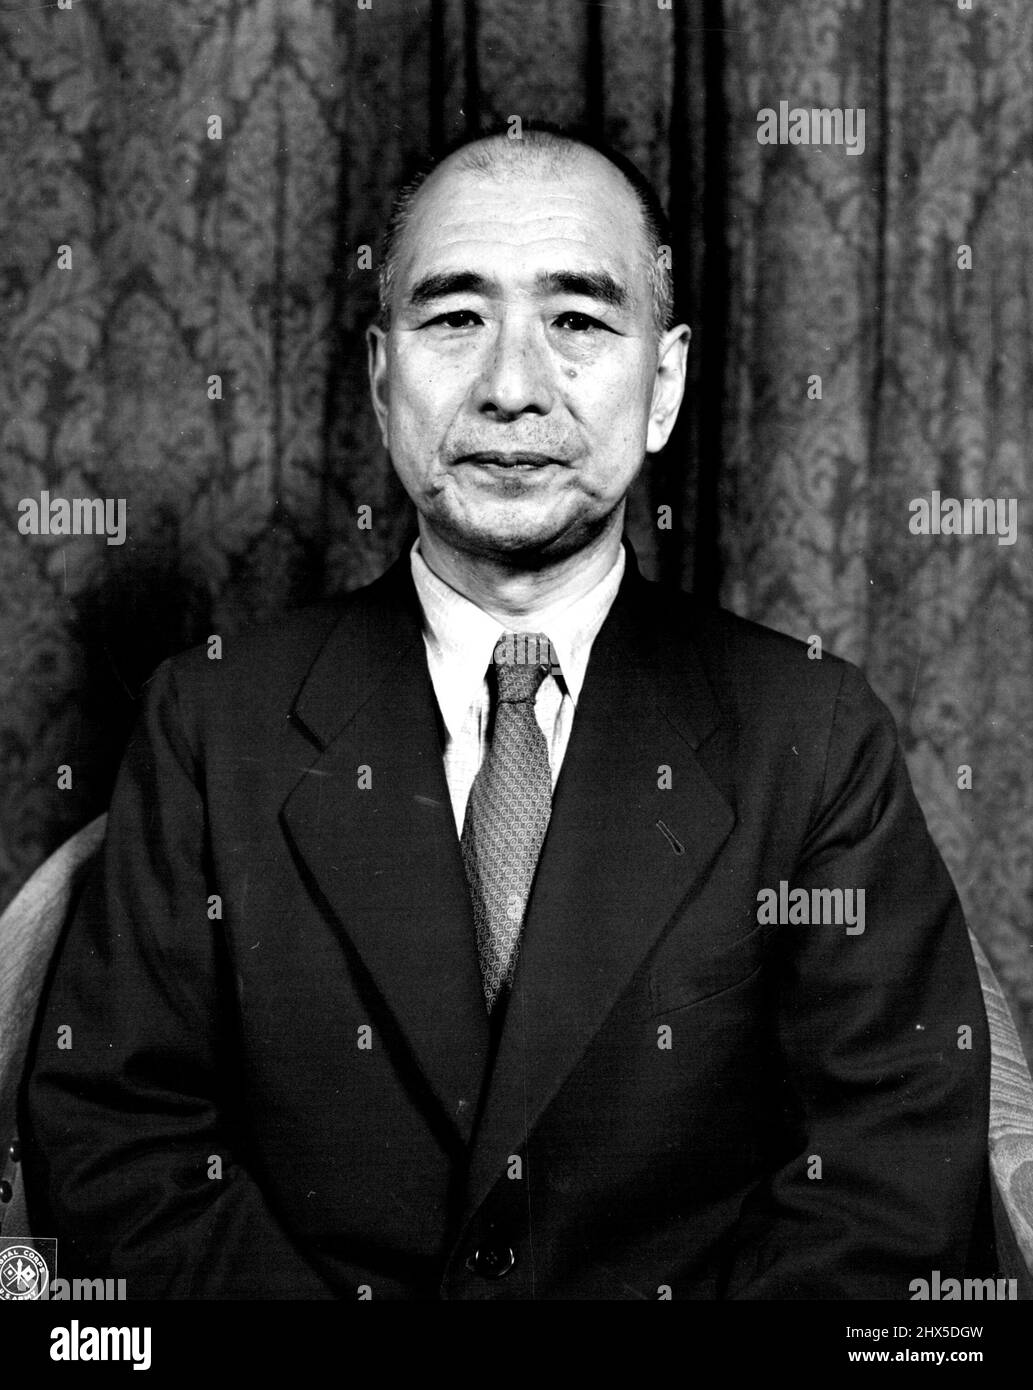 Alleged Major Japanese war Criminal : Shigetaro Shimada, Former Admiral, Navy Minister under Tojo in 1941 and member of Supreme war council in 1944, is on trial at the International Military Tribunal for the Far East, Tokyo, Japan. August 27, 1947. (Photo by Skinner, U.S. Army Signal Corps). Stock Photo